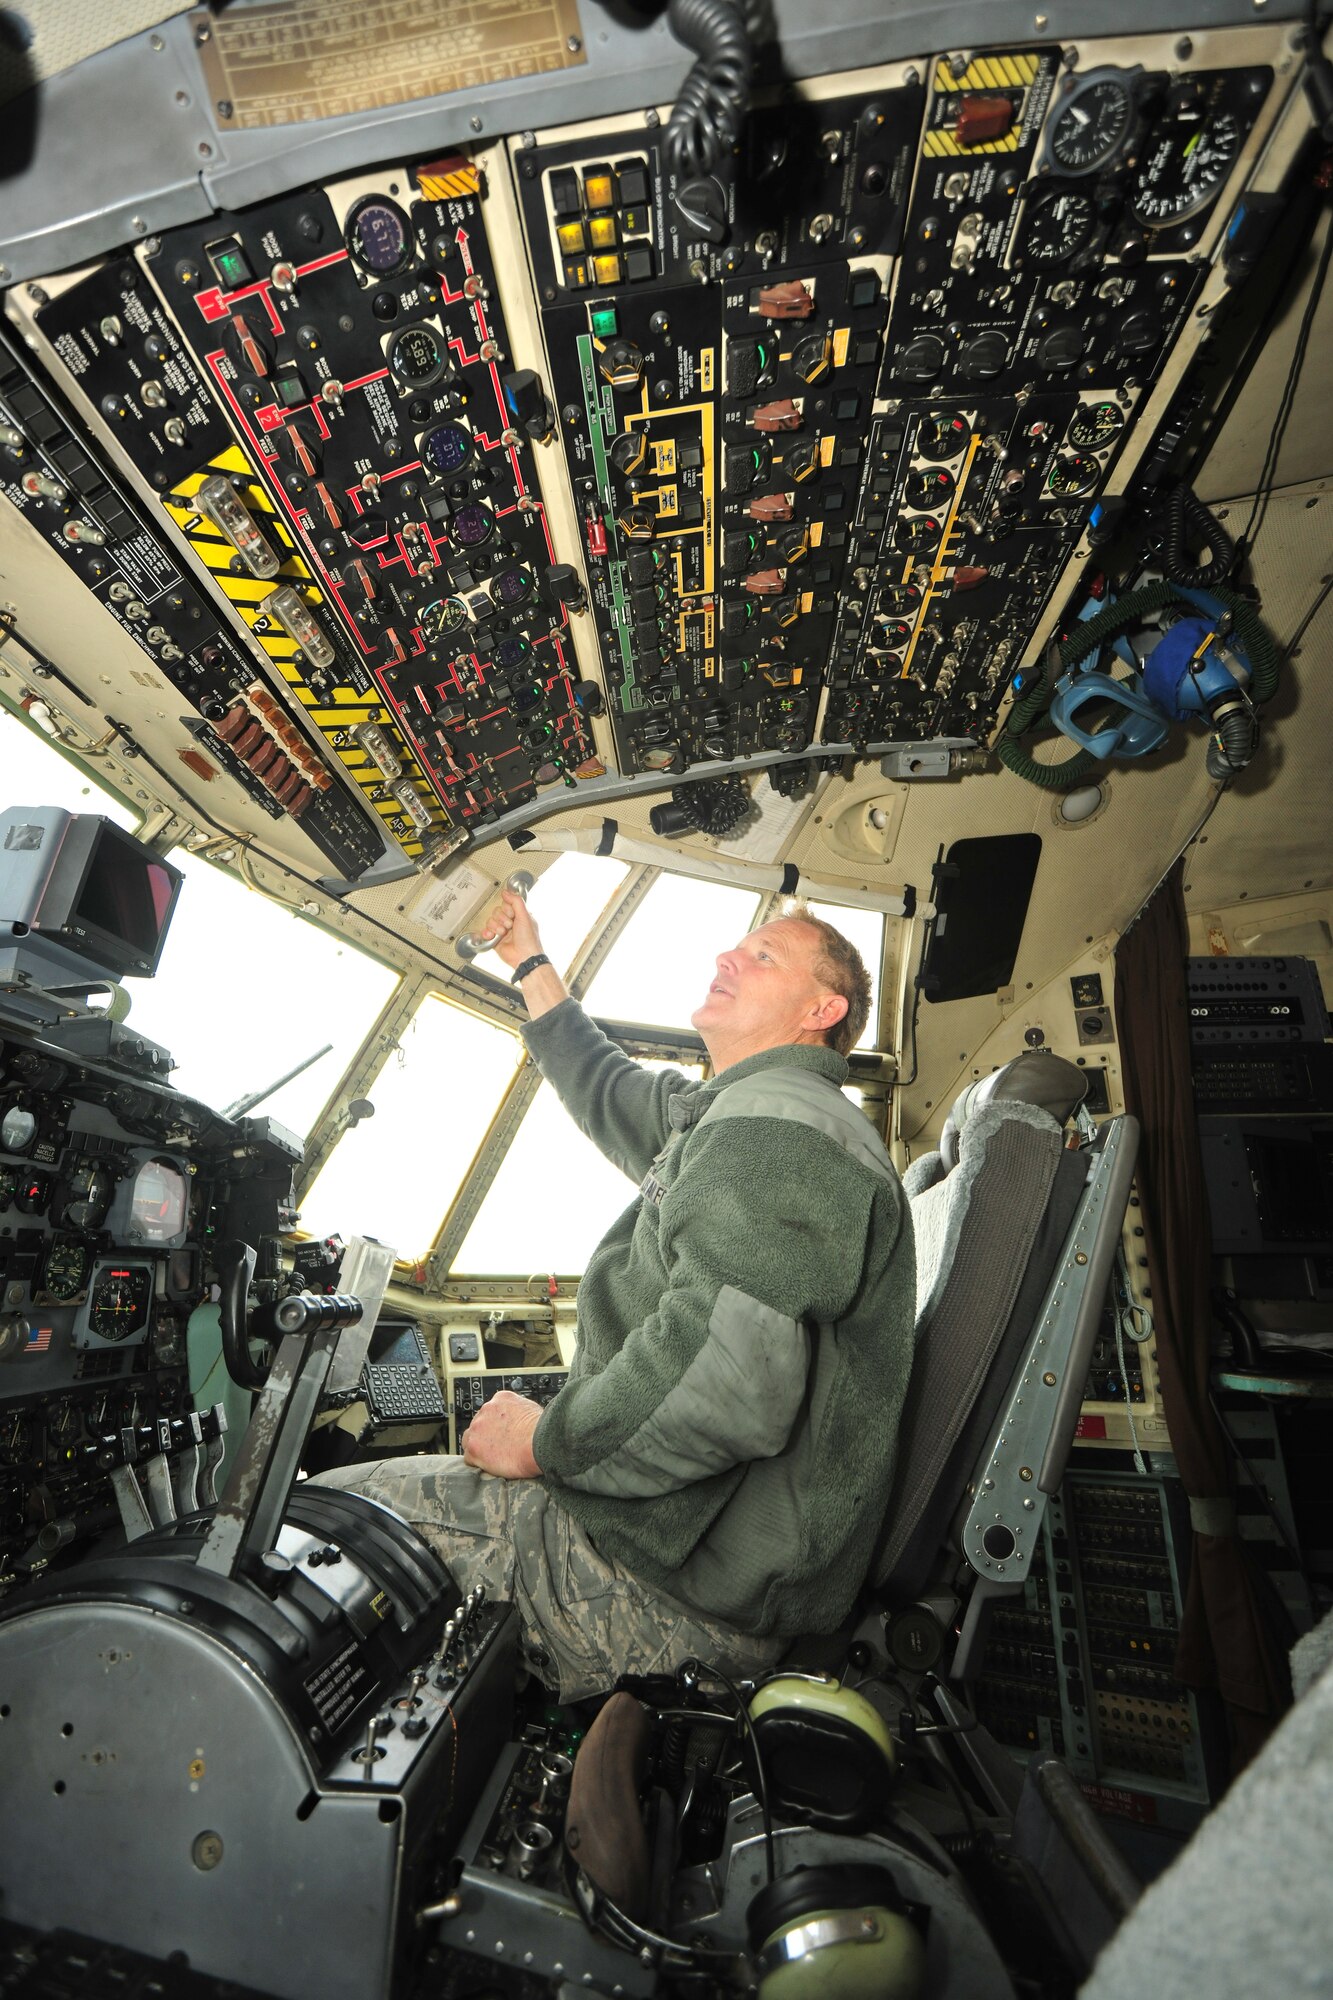 Master Sgt. Jeffery Dillon of the 166th Maintenance Squadron, Delaware Air National Guard, maintains instruments aboard a C-130 aircraft at the New Castle ANG Base, Del., April 10, 2015. The aircraft will be flown April 11 during Operation Cyclone, a Delaware National Guard joint training exercise when Airmen and Soldiers will respond to a simulated tornado that has swept through New Castle County. Army Black Hawk helicopters will evacuate simulated wounded personnel to the air base, with patients loaded onto C-130s for aerial evacuation. Separate from the exercise, on April 12, six C-130s will participate in the largest formation flown by the wing since departing for Southwest Asia in March 2003 to support Operation Iraqi Freedom. (U.S. Air National Guard photo by Staff Sgt. John Michaels)